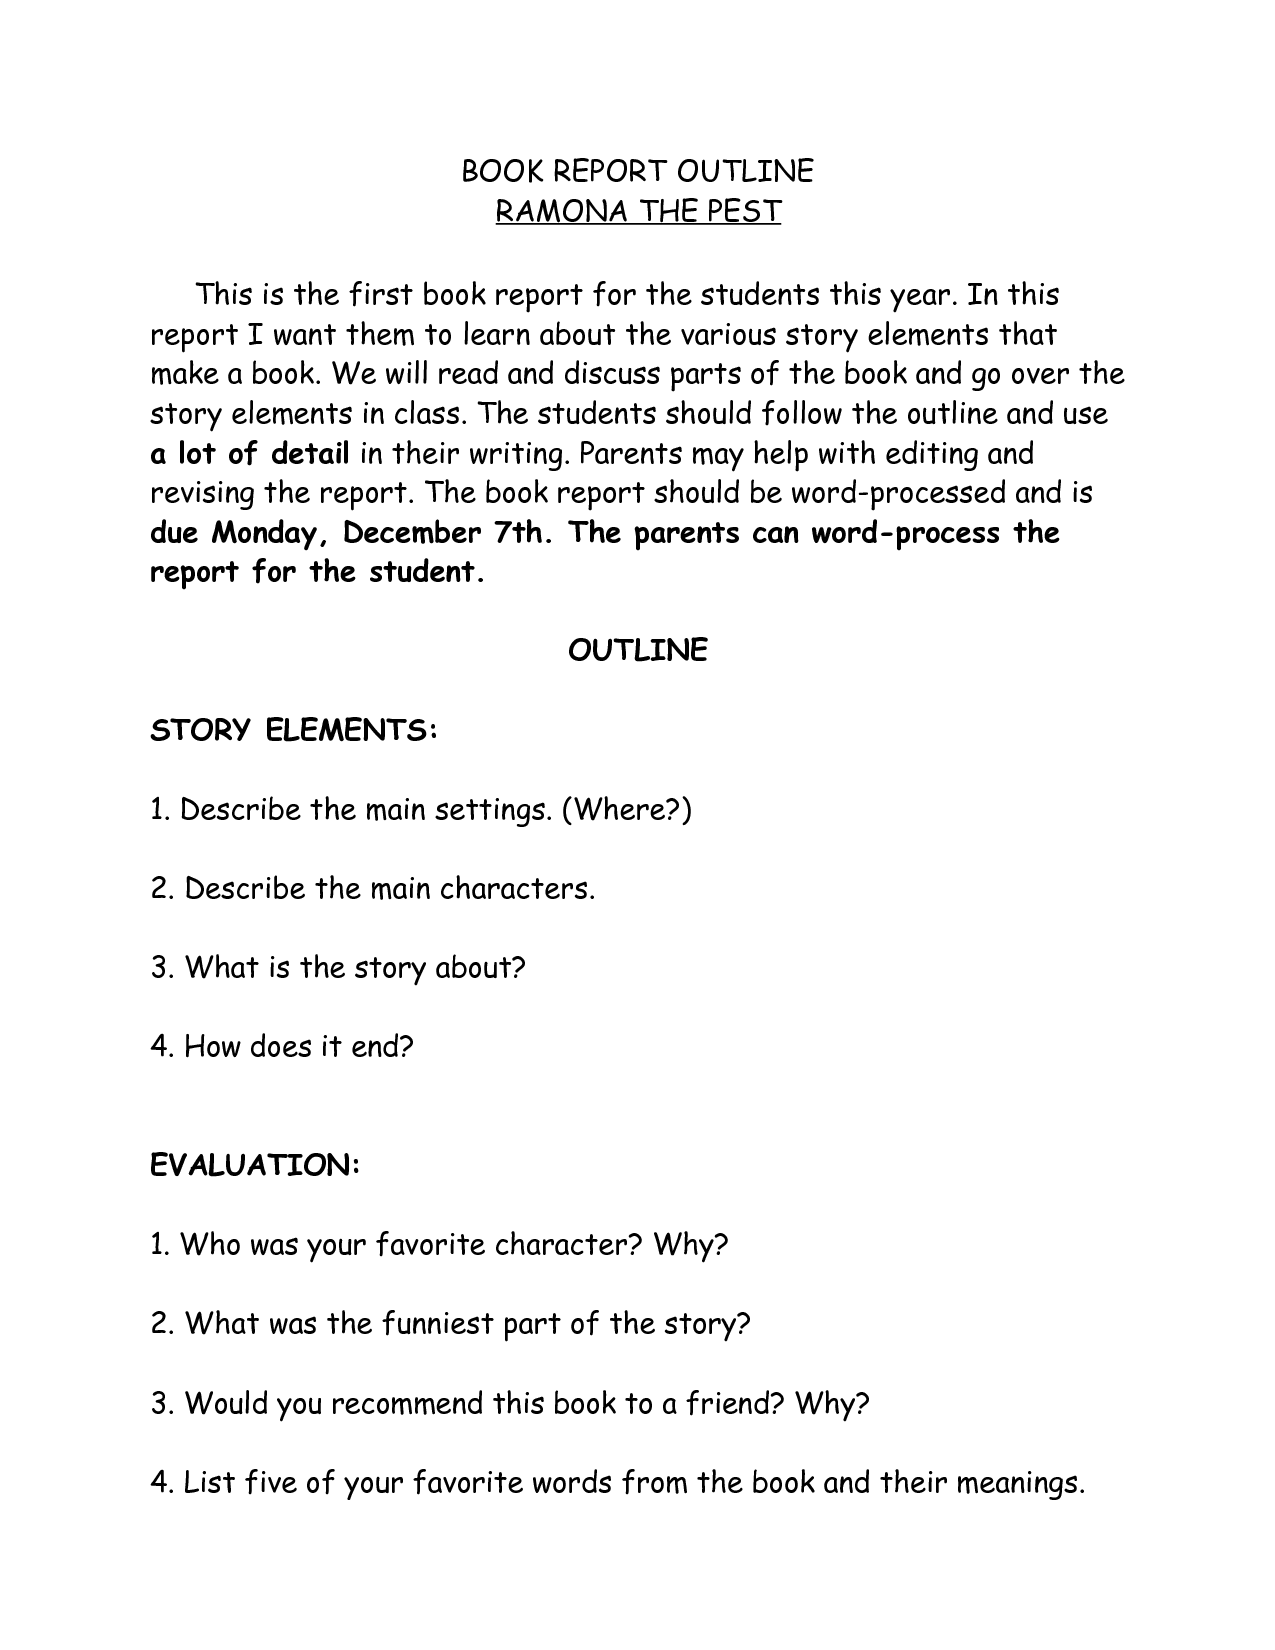 Basic book report outlines